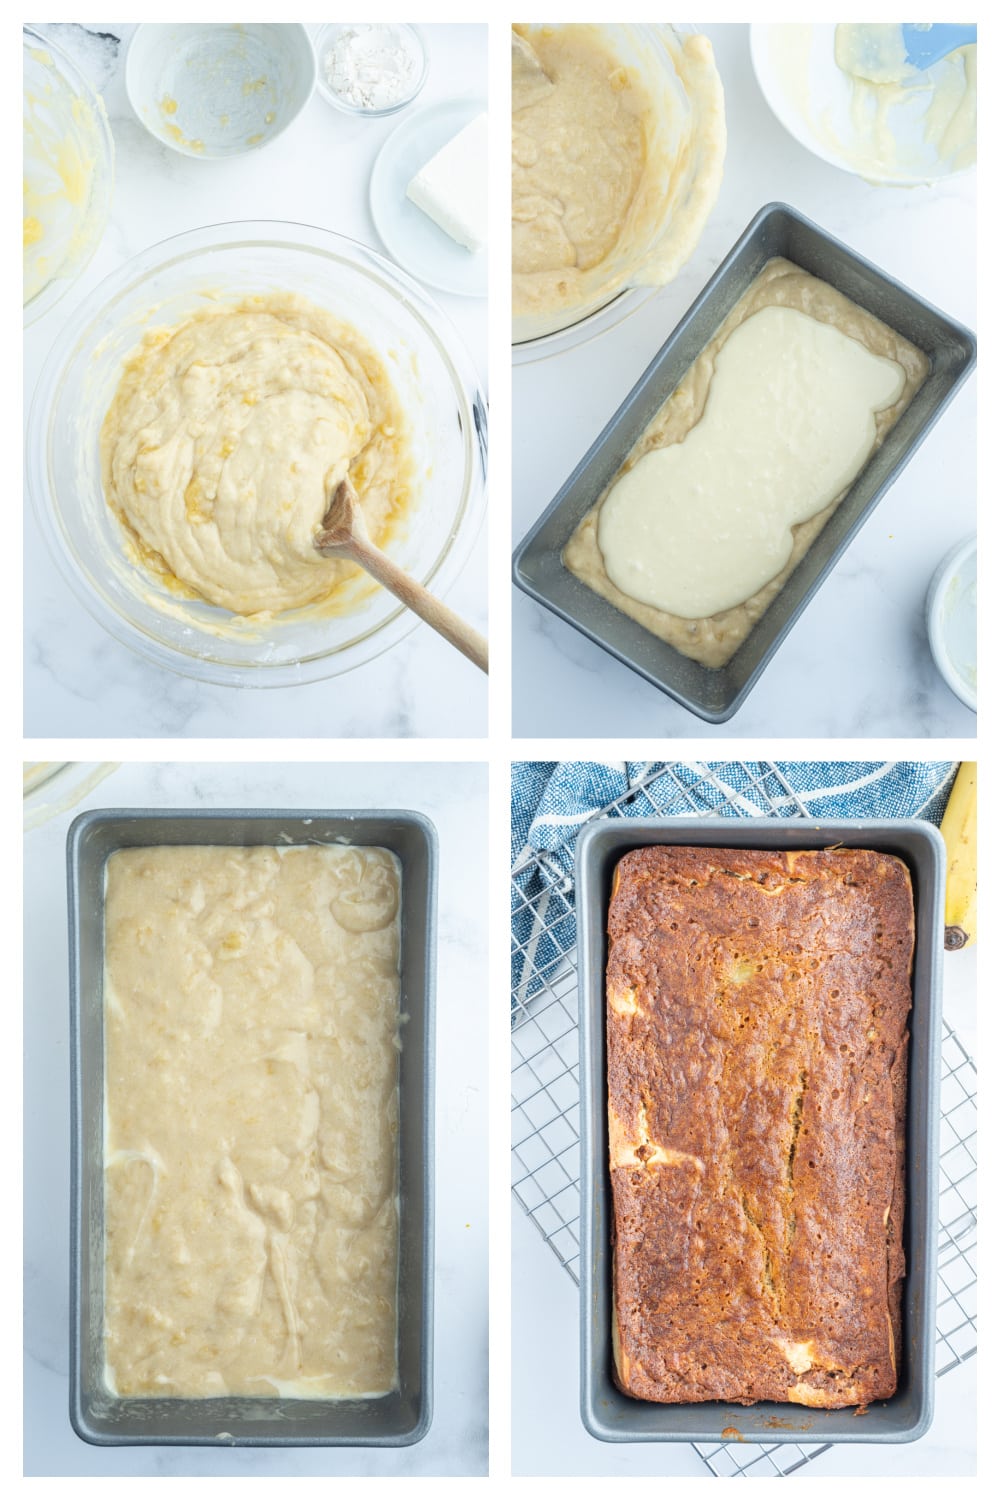 four photos showing how to make cheesecake banana bread